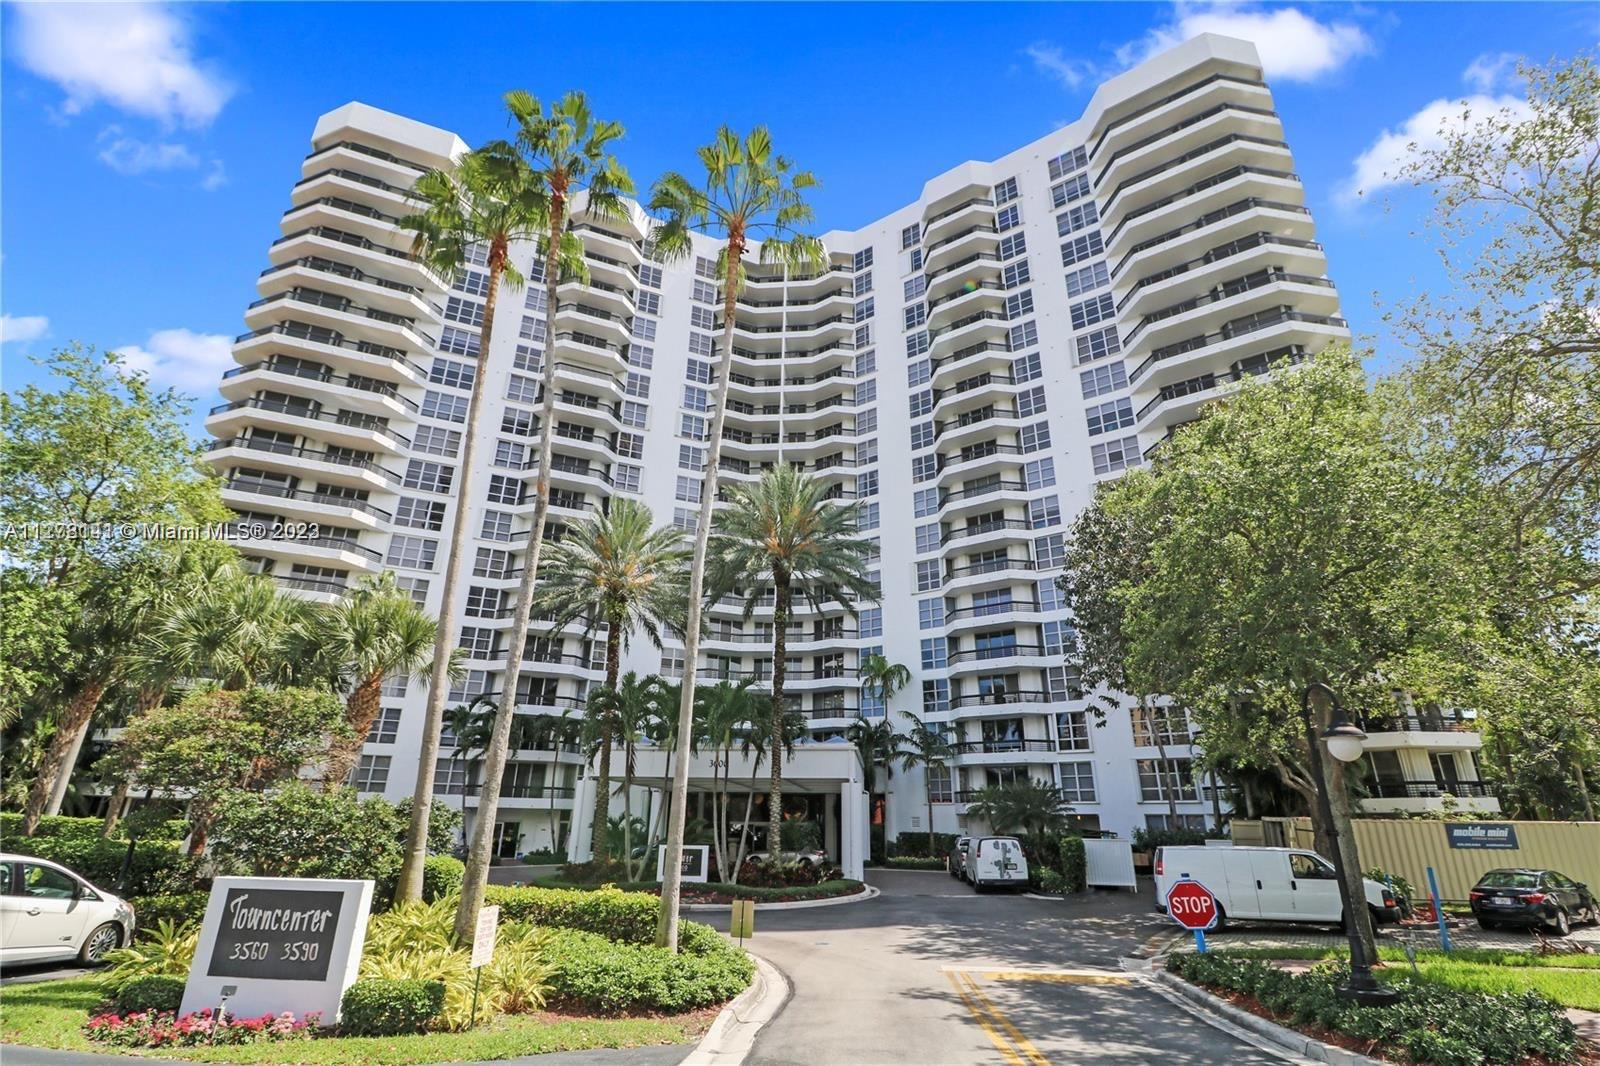 A truly beautiful condo in the heart of Aventura prime sought after location. Spacious open floor plan. Located in the Mystic Pointe development, this unit entails all South Florida has to offer: close to the Bal Harbour shops, entertainment, beaches, and fine dining. This condo residence overlooks the tennis courts within the community, which also includes a pool, fitness center, gated security plus lobby doorman, with a clubhouse overlooking the bay. Starting 10/26/22 showings with be only Mondays 11 am-12pm and Wednesdays 5-6pm. 48 hours notice to show. Need offers in writing before setting up appointment. Tenant in unit until October 2023.